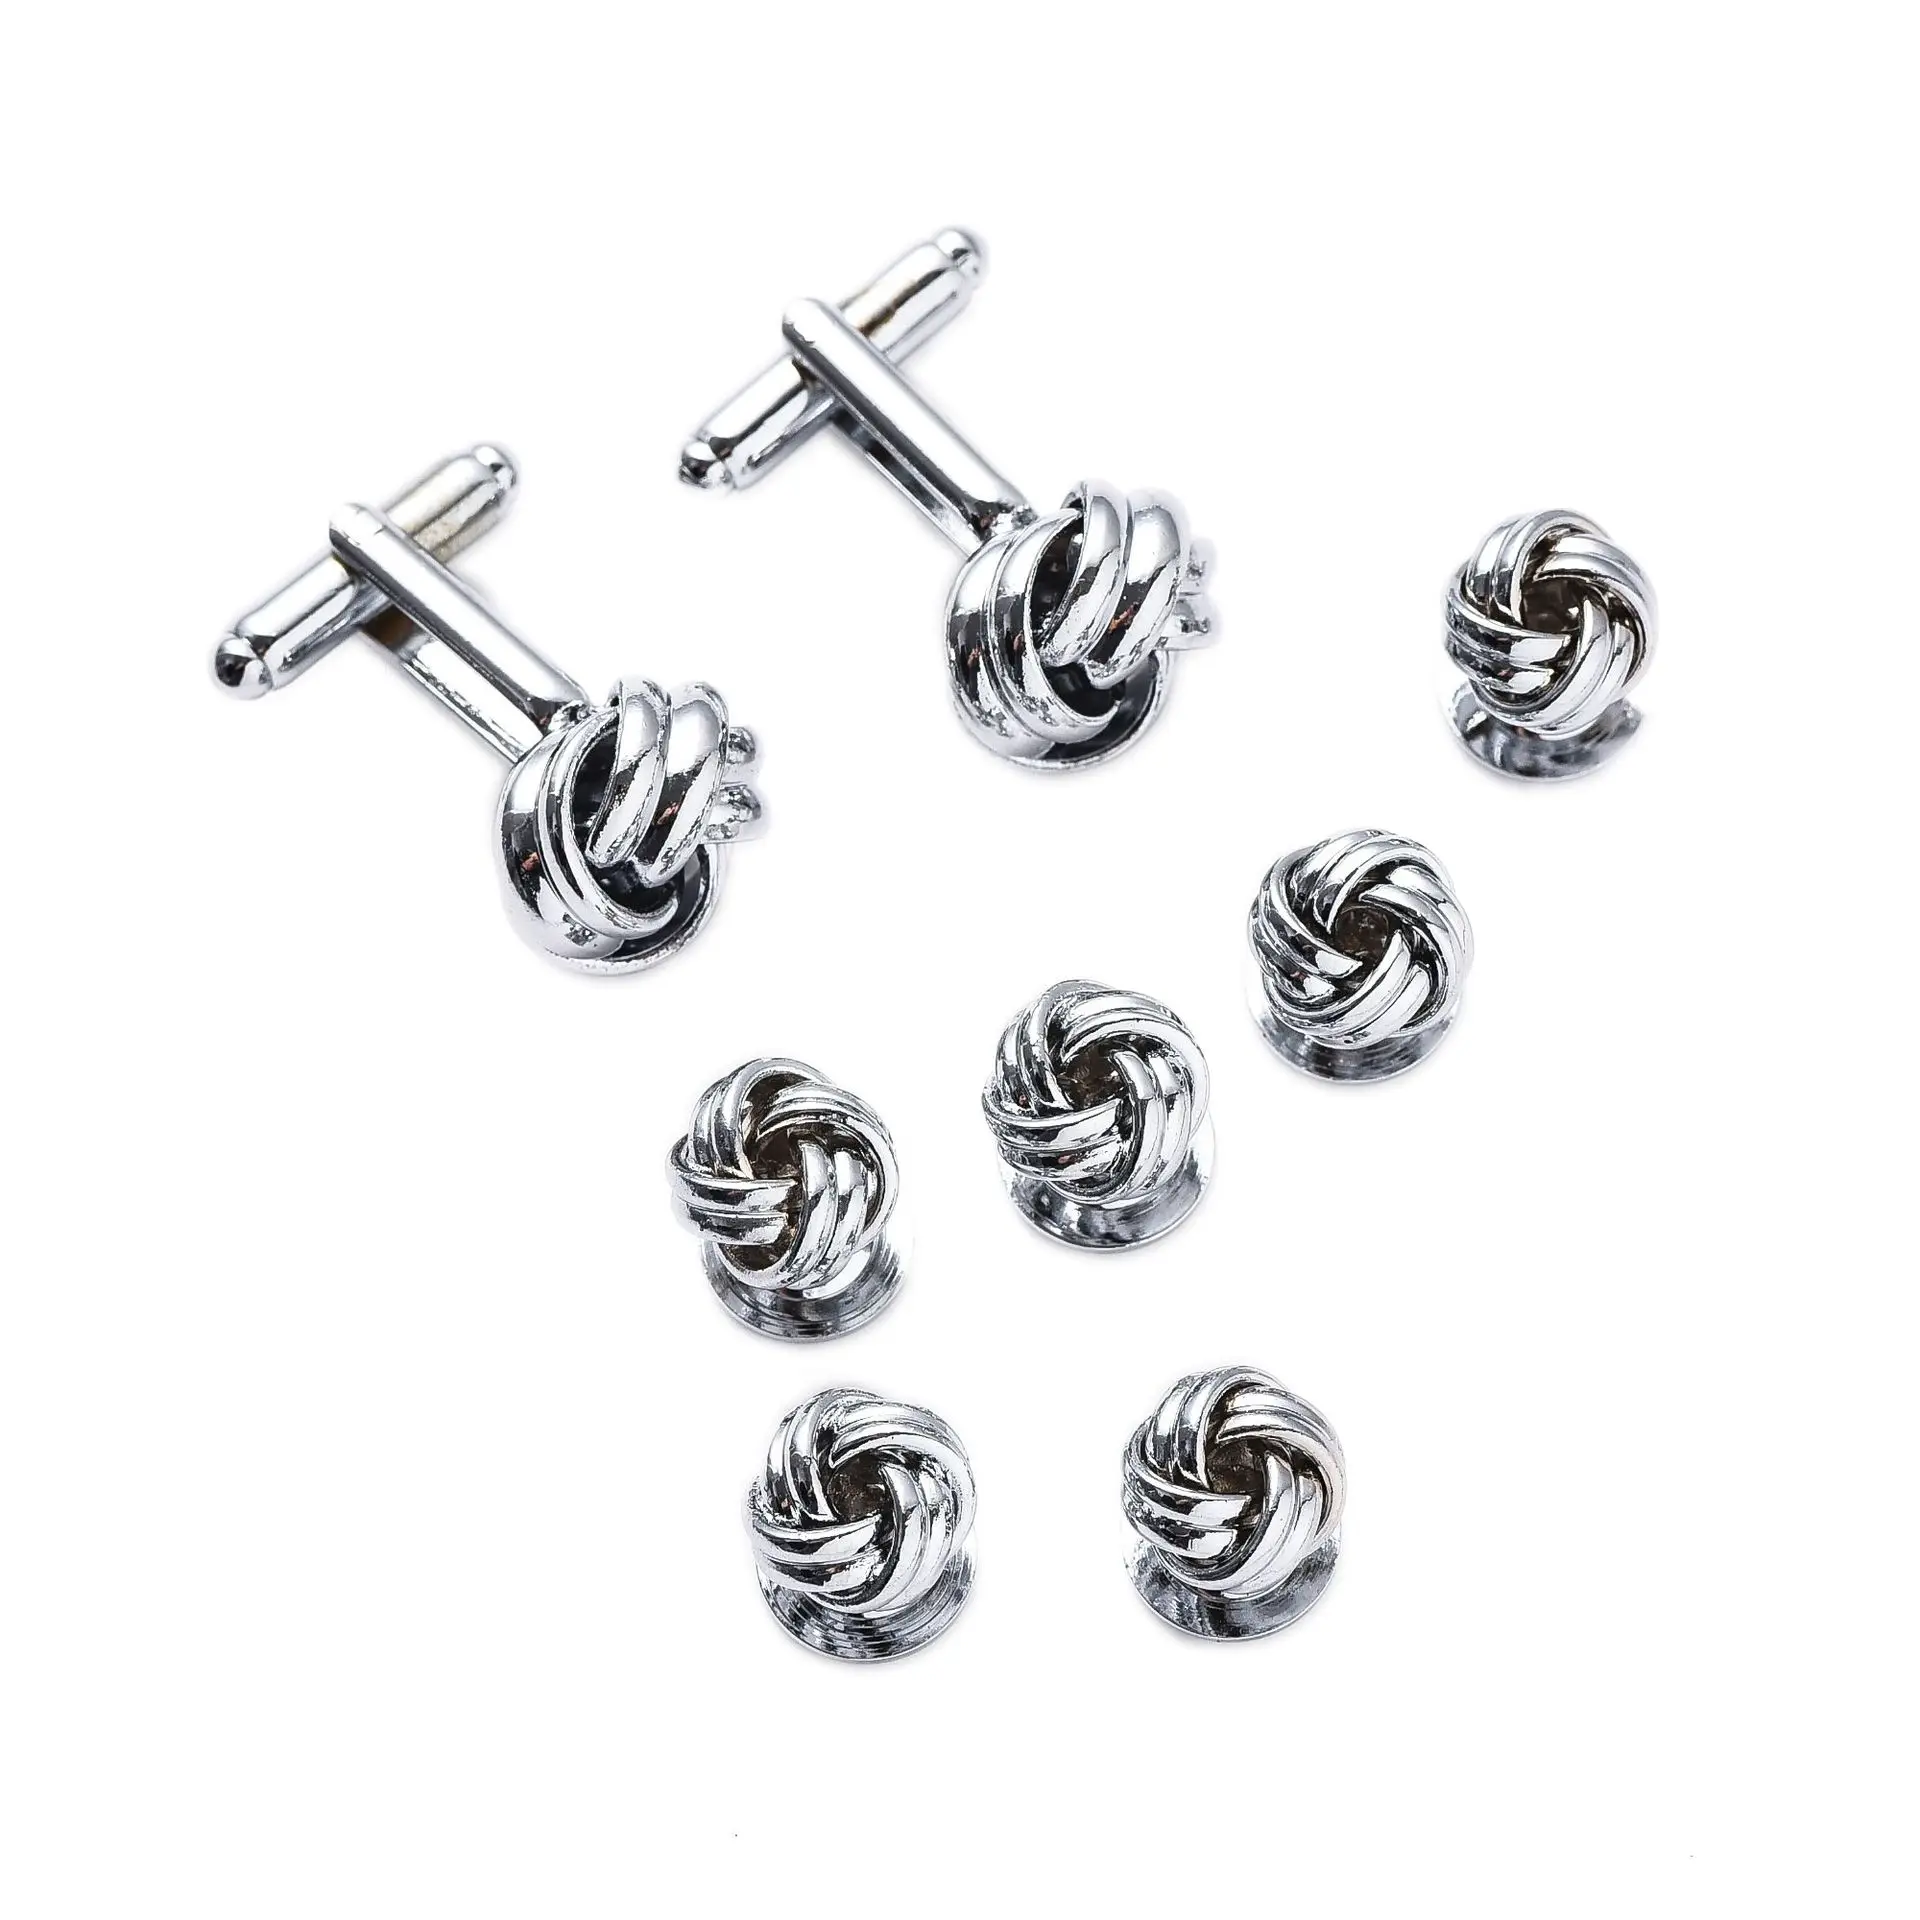 

Twist Knot Cufflinks and Studs Set for Men Tie Clasp Cuff Links Shirts Classic Clip Match Business Wedding Formal Suit